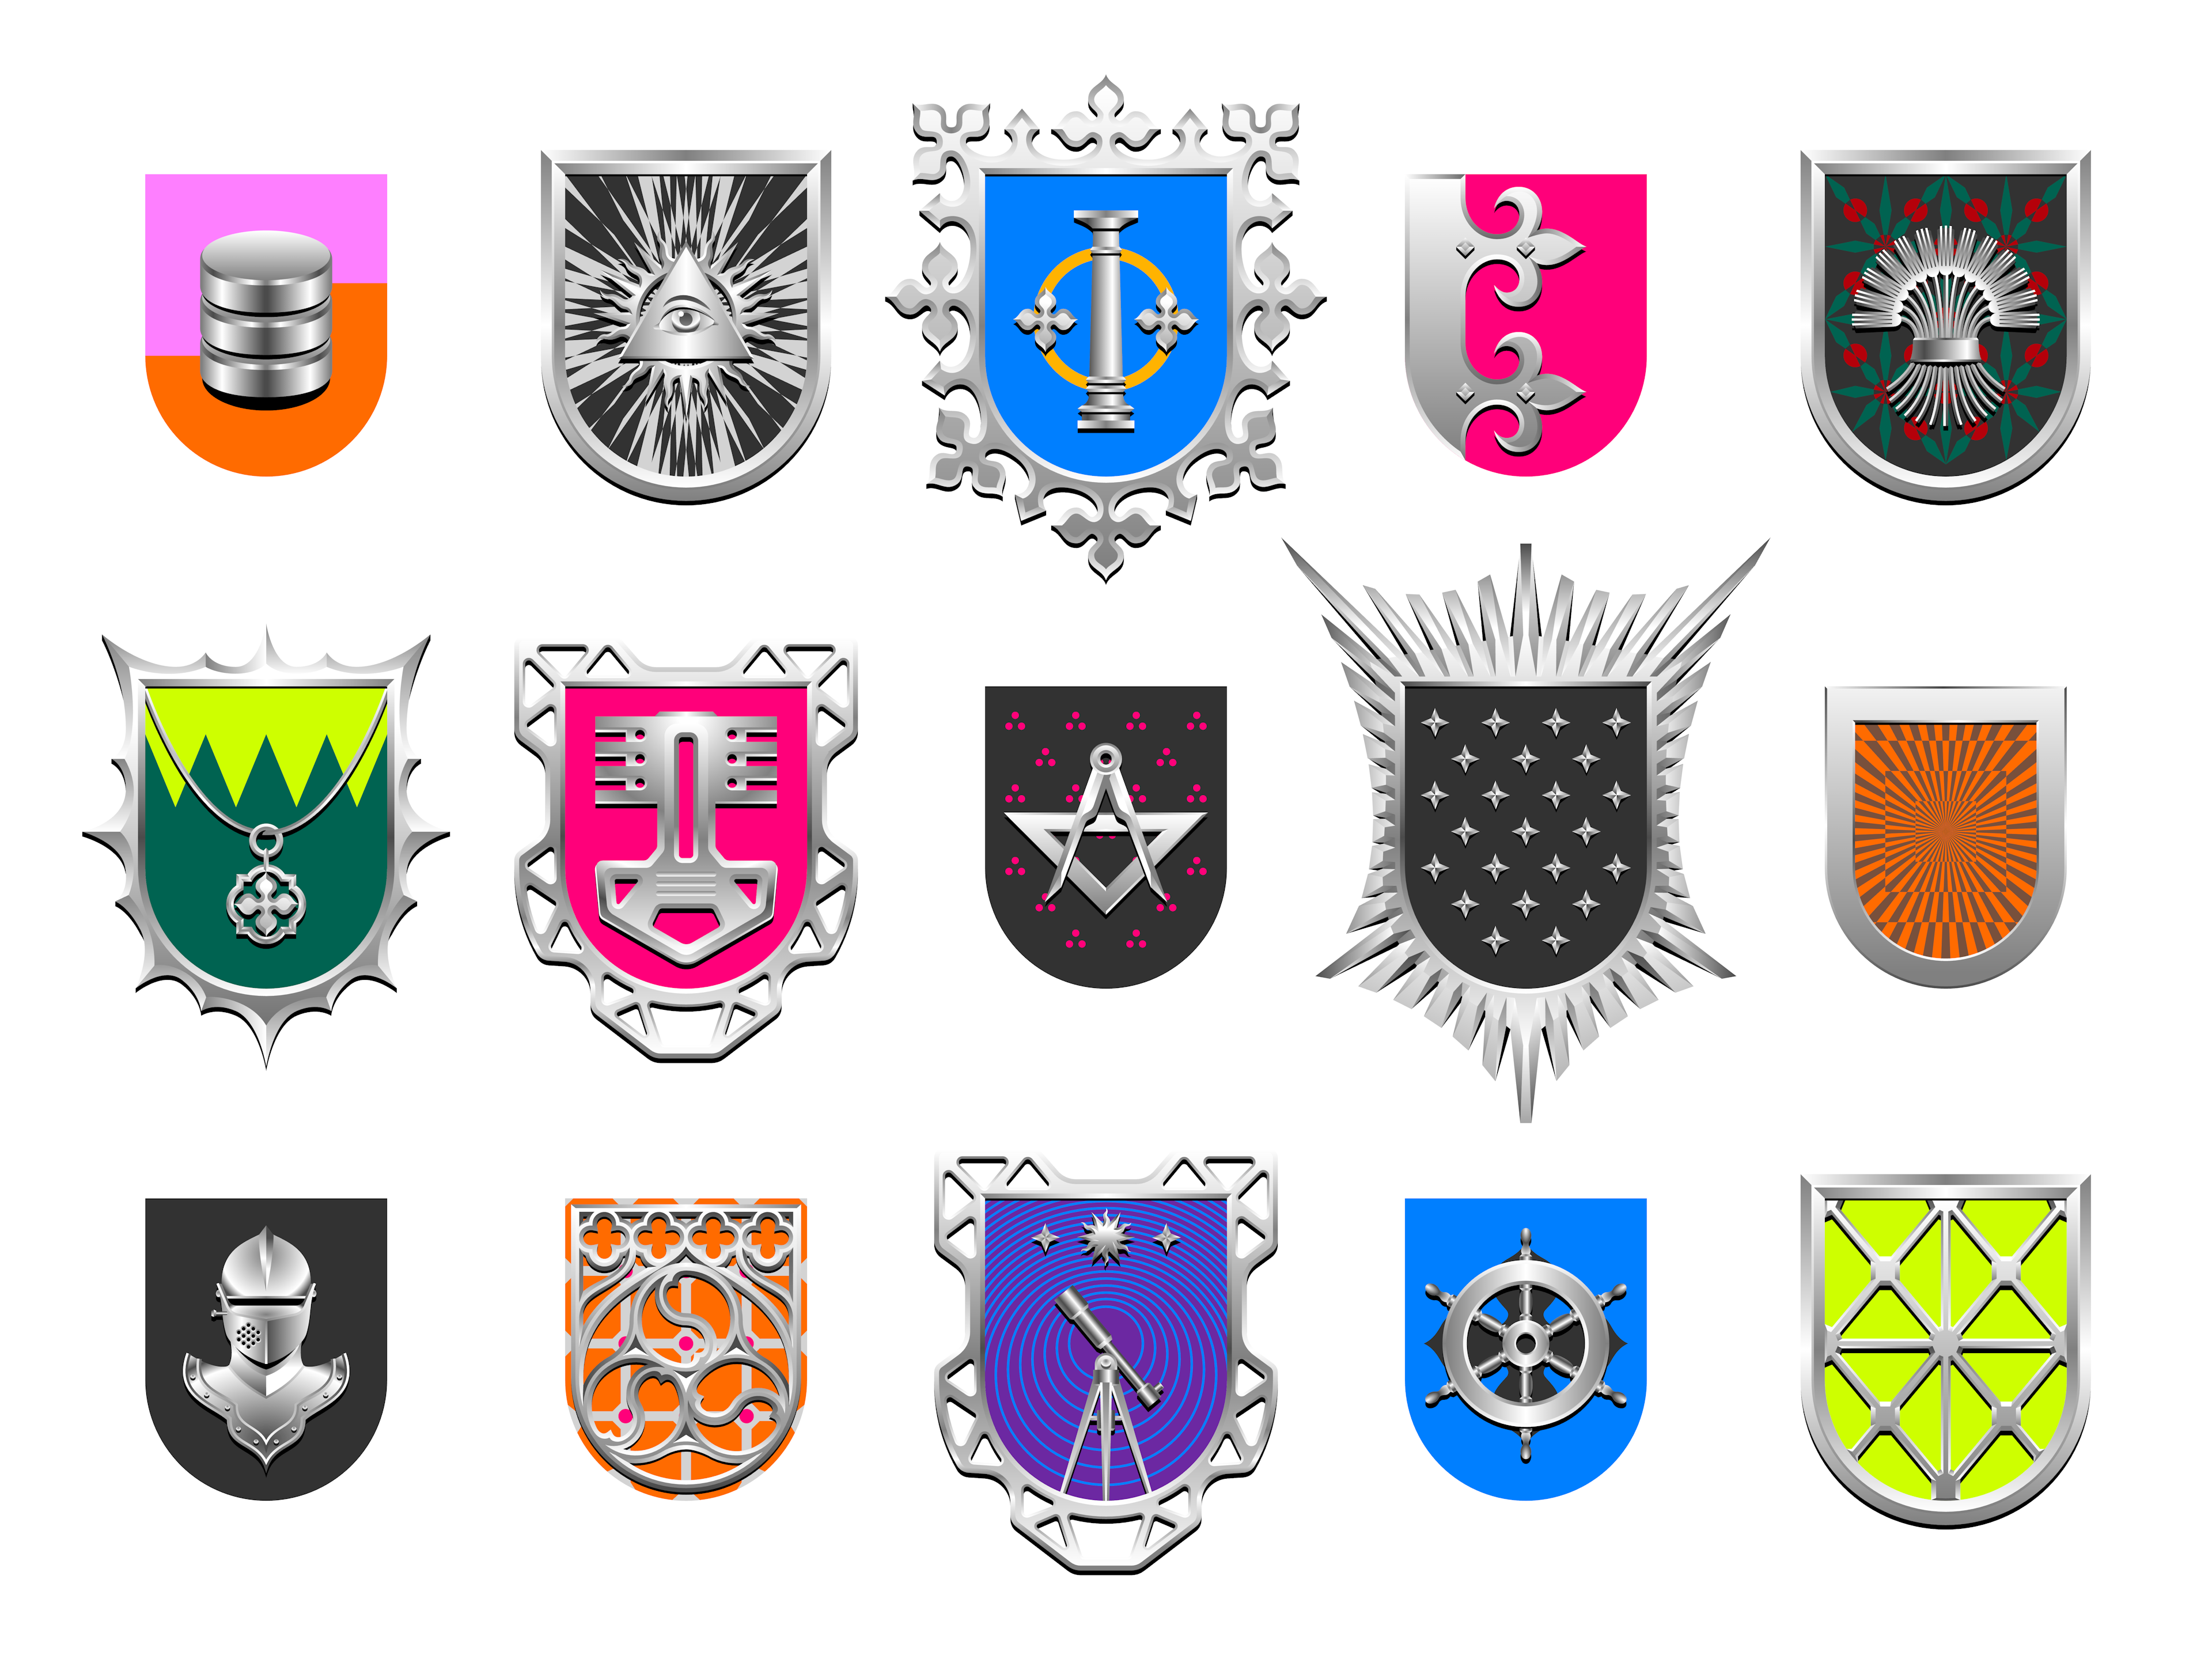 A limited selection of the Shields that have been built on-chain so far.